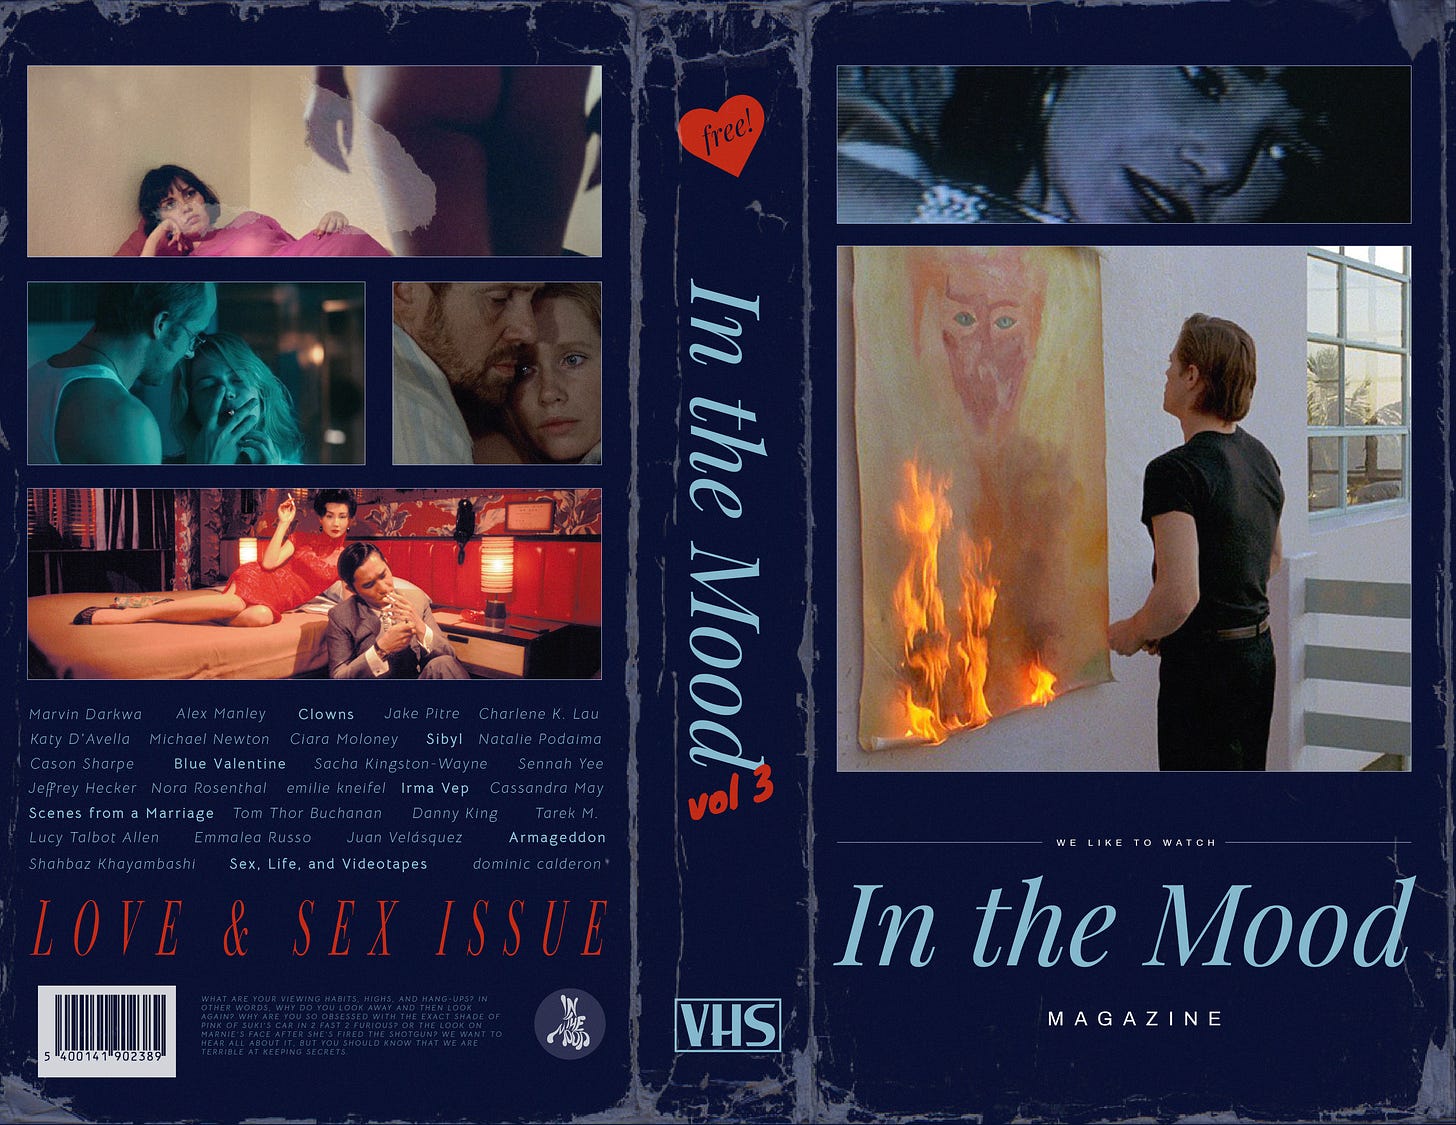 Cover for In The Mood Mag Issue 3 - a VHS-style design with sexy film screencaps and a list of contributors.